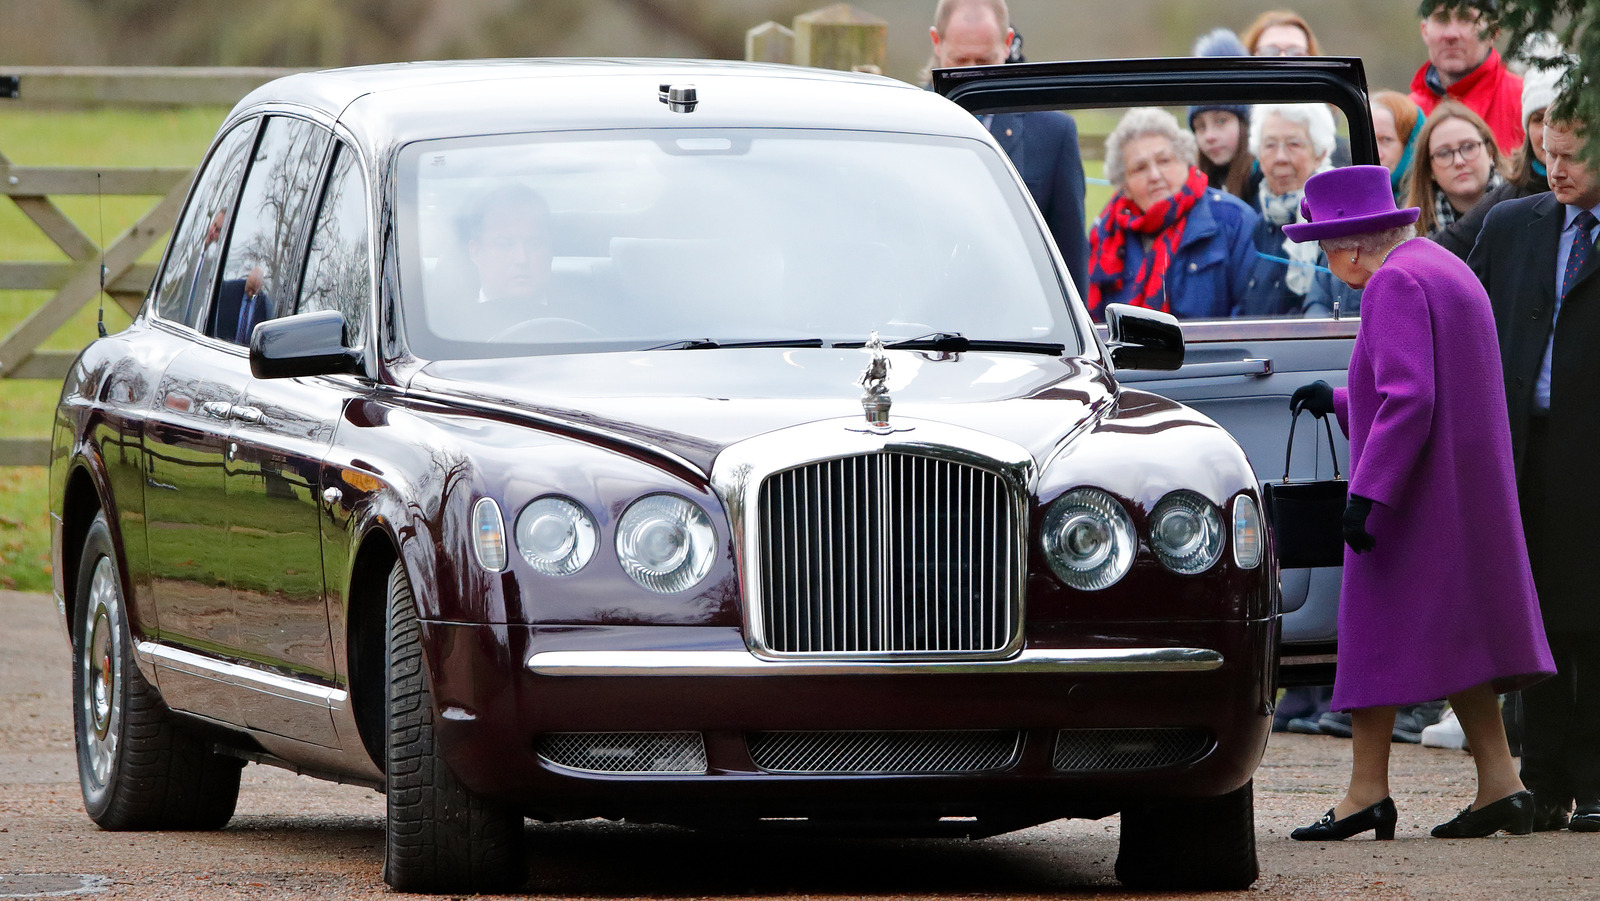 Queen Elizabeth II Owned The 2nd Most Expensive Car In The World. Here’s Why It Was Special